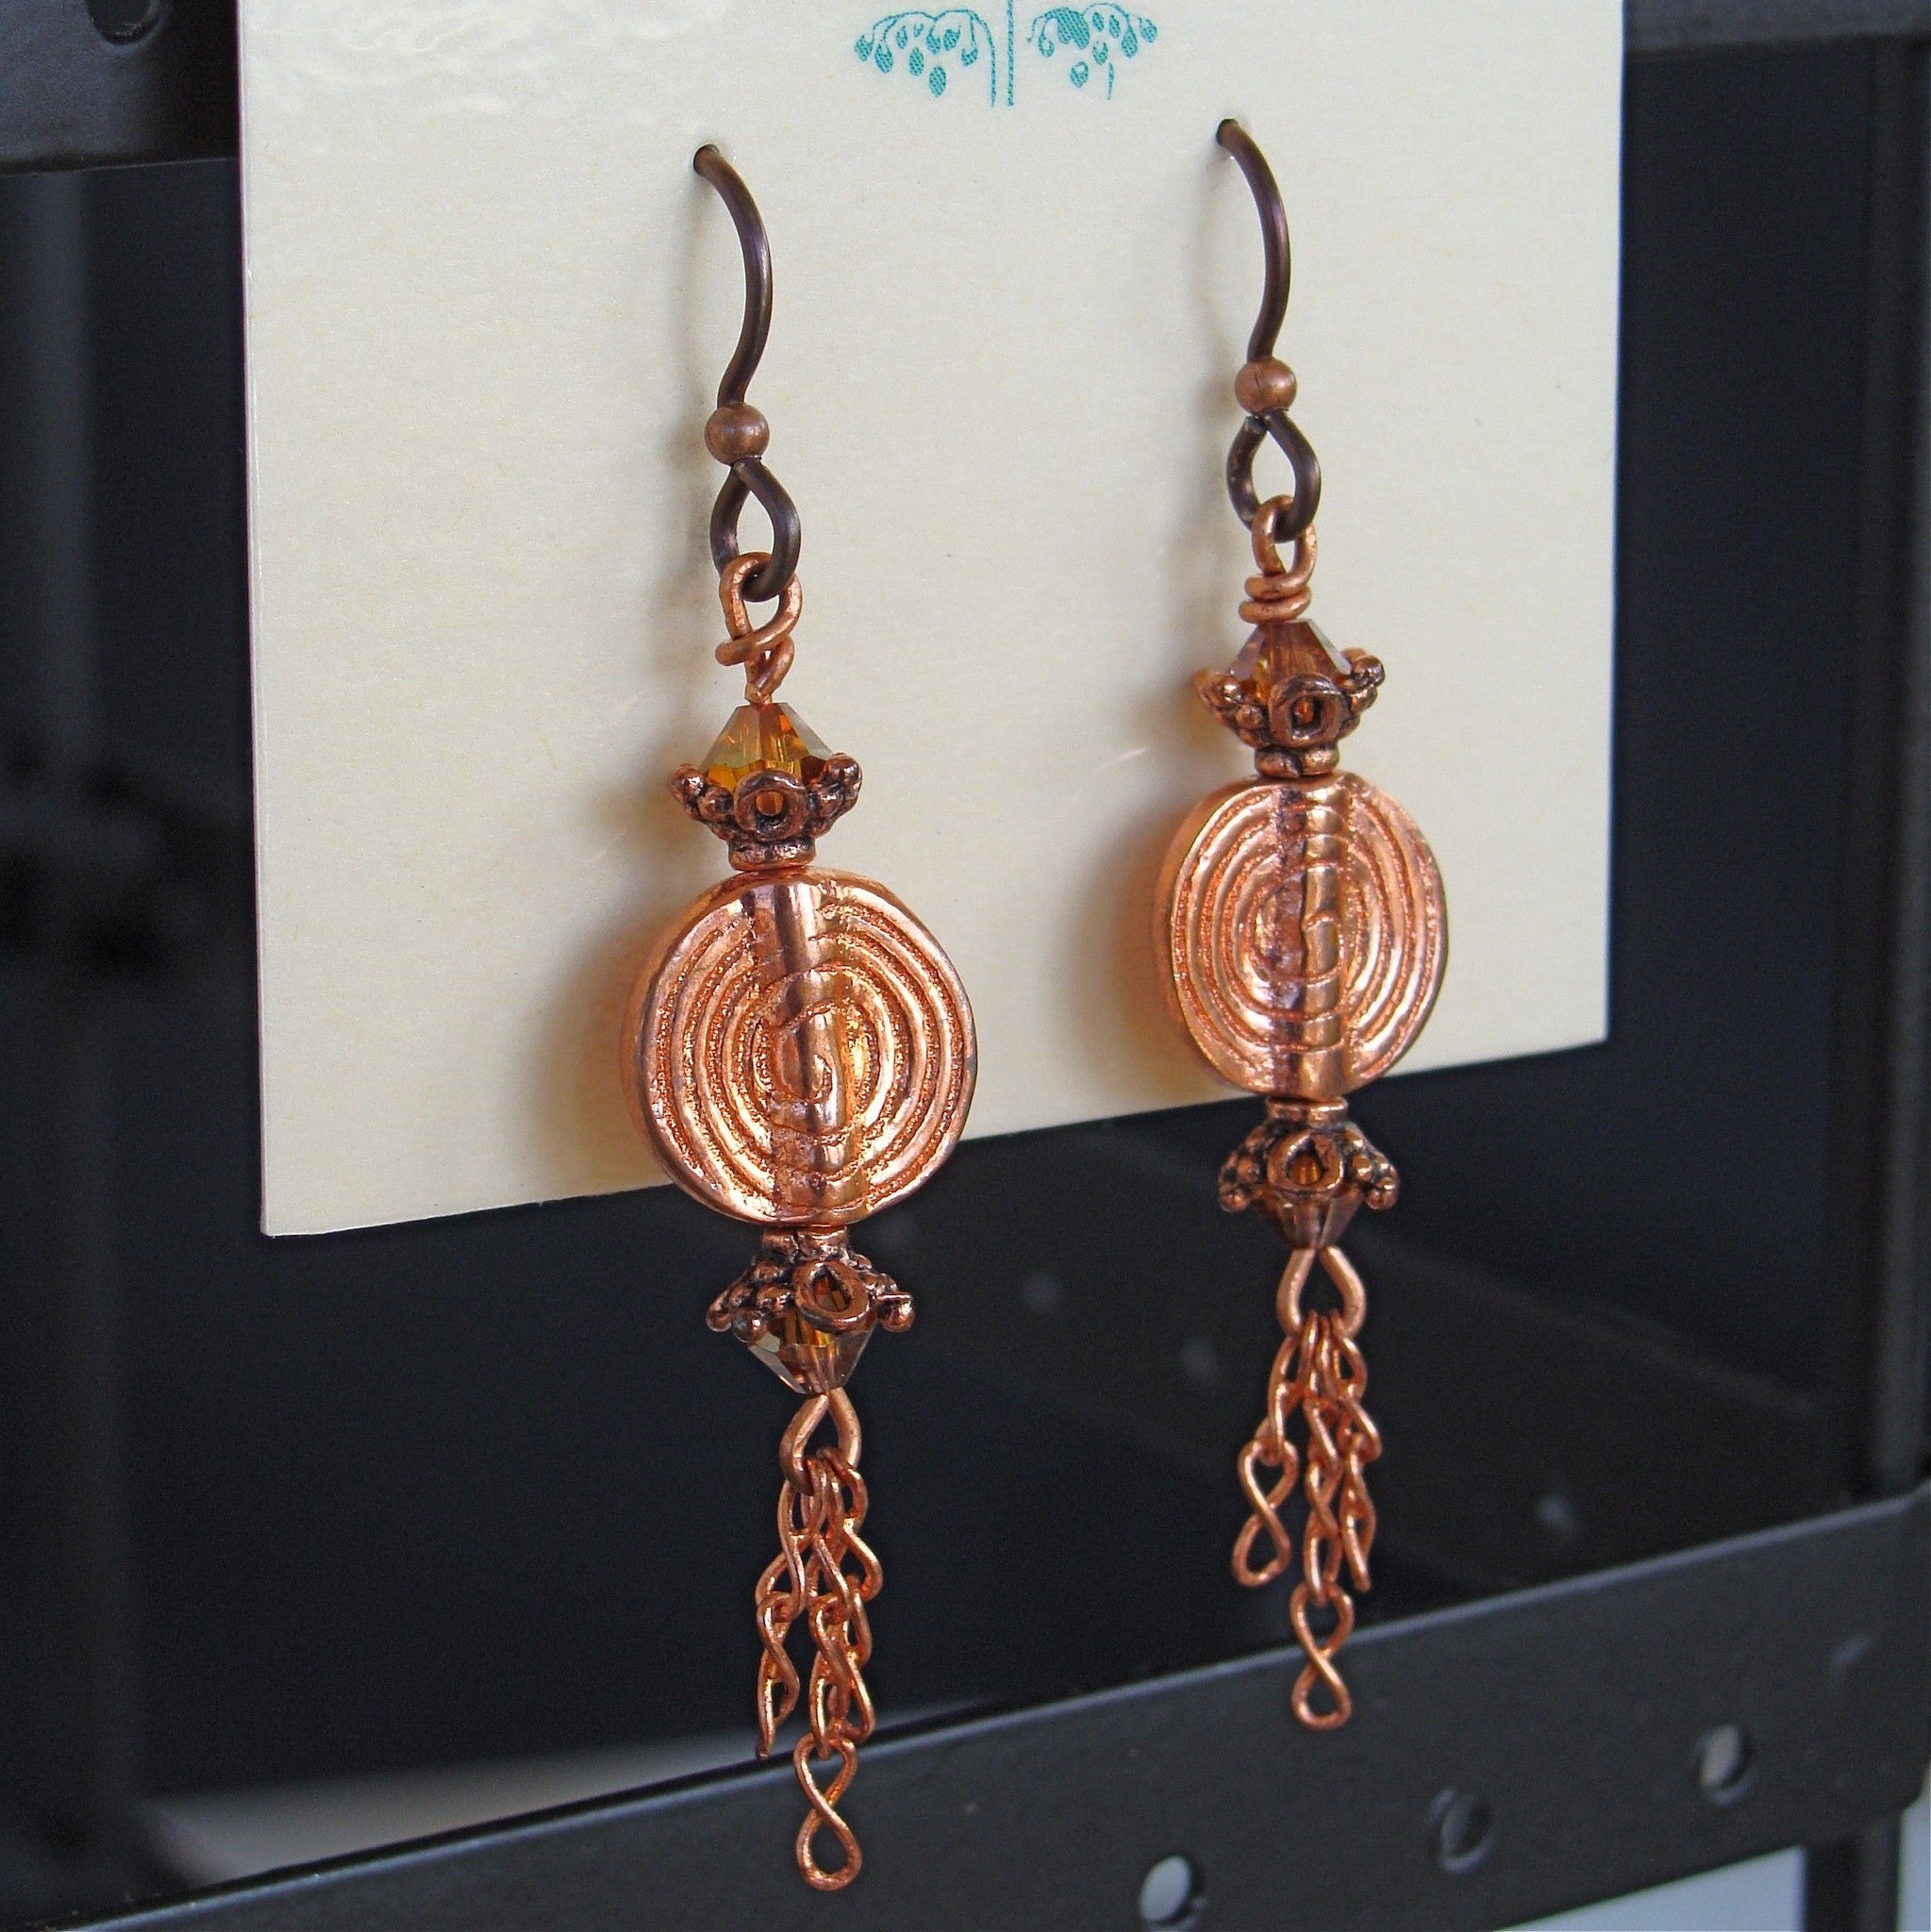 Copper Swirl: Pounded Copper Spiral Earrings with Swarovski Crystals